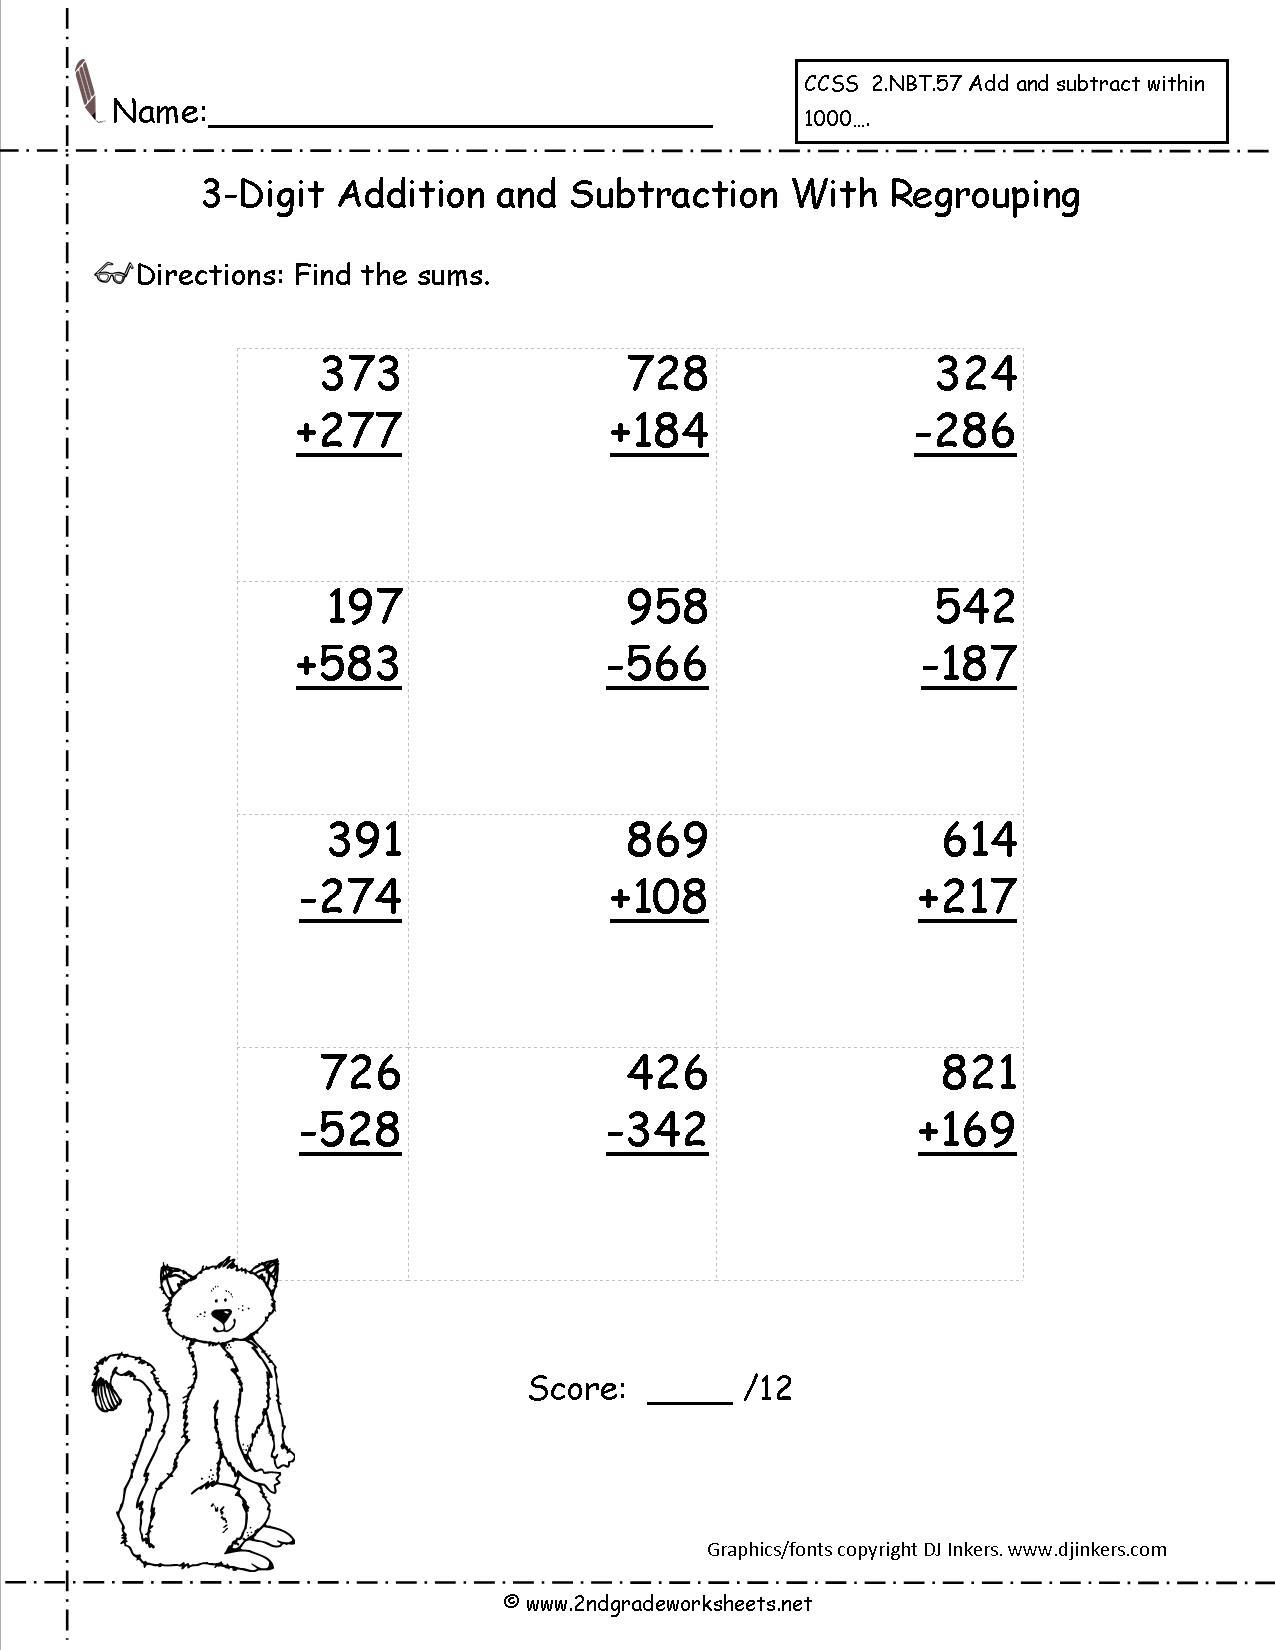 Three-Digit Addition and Subtraction Worksheets Image